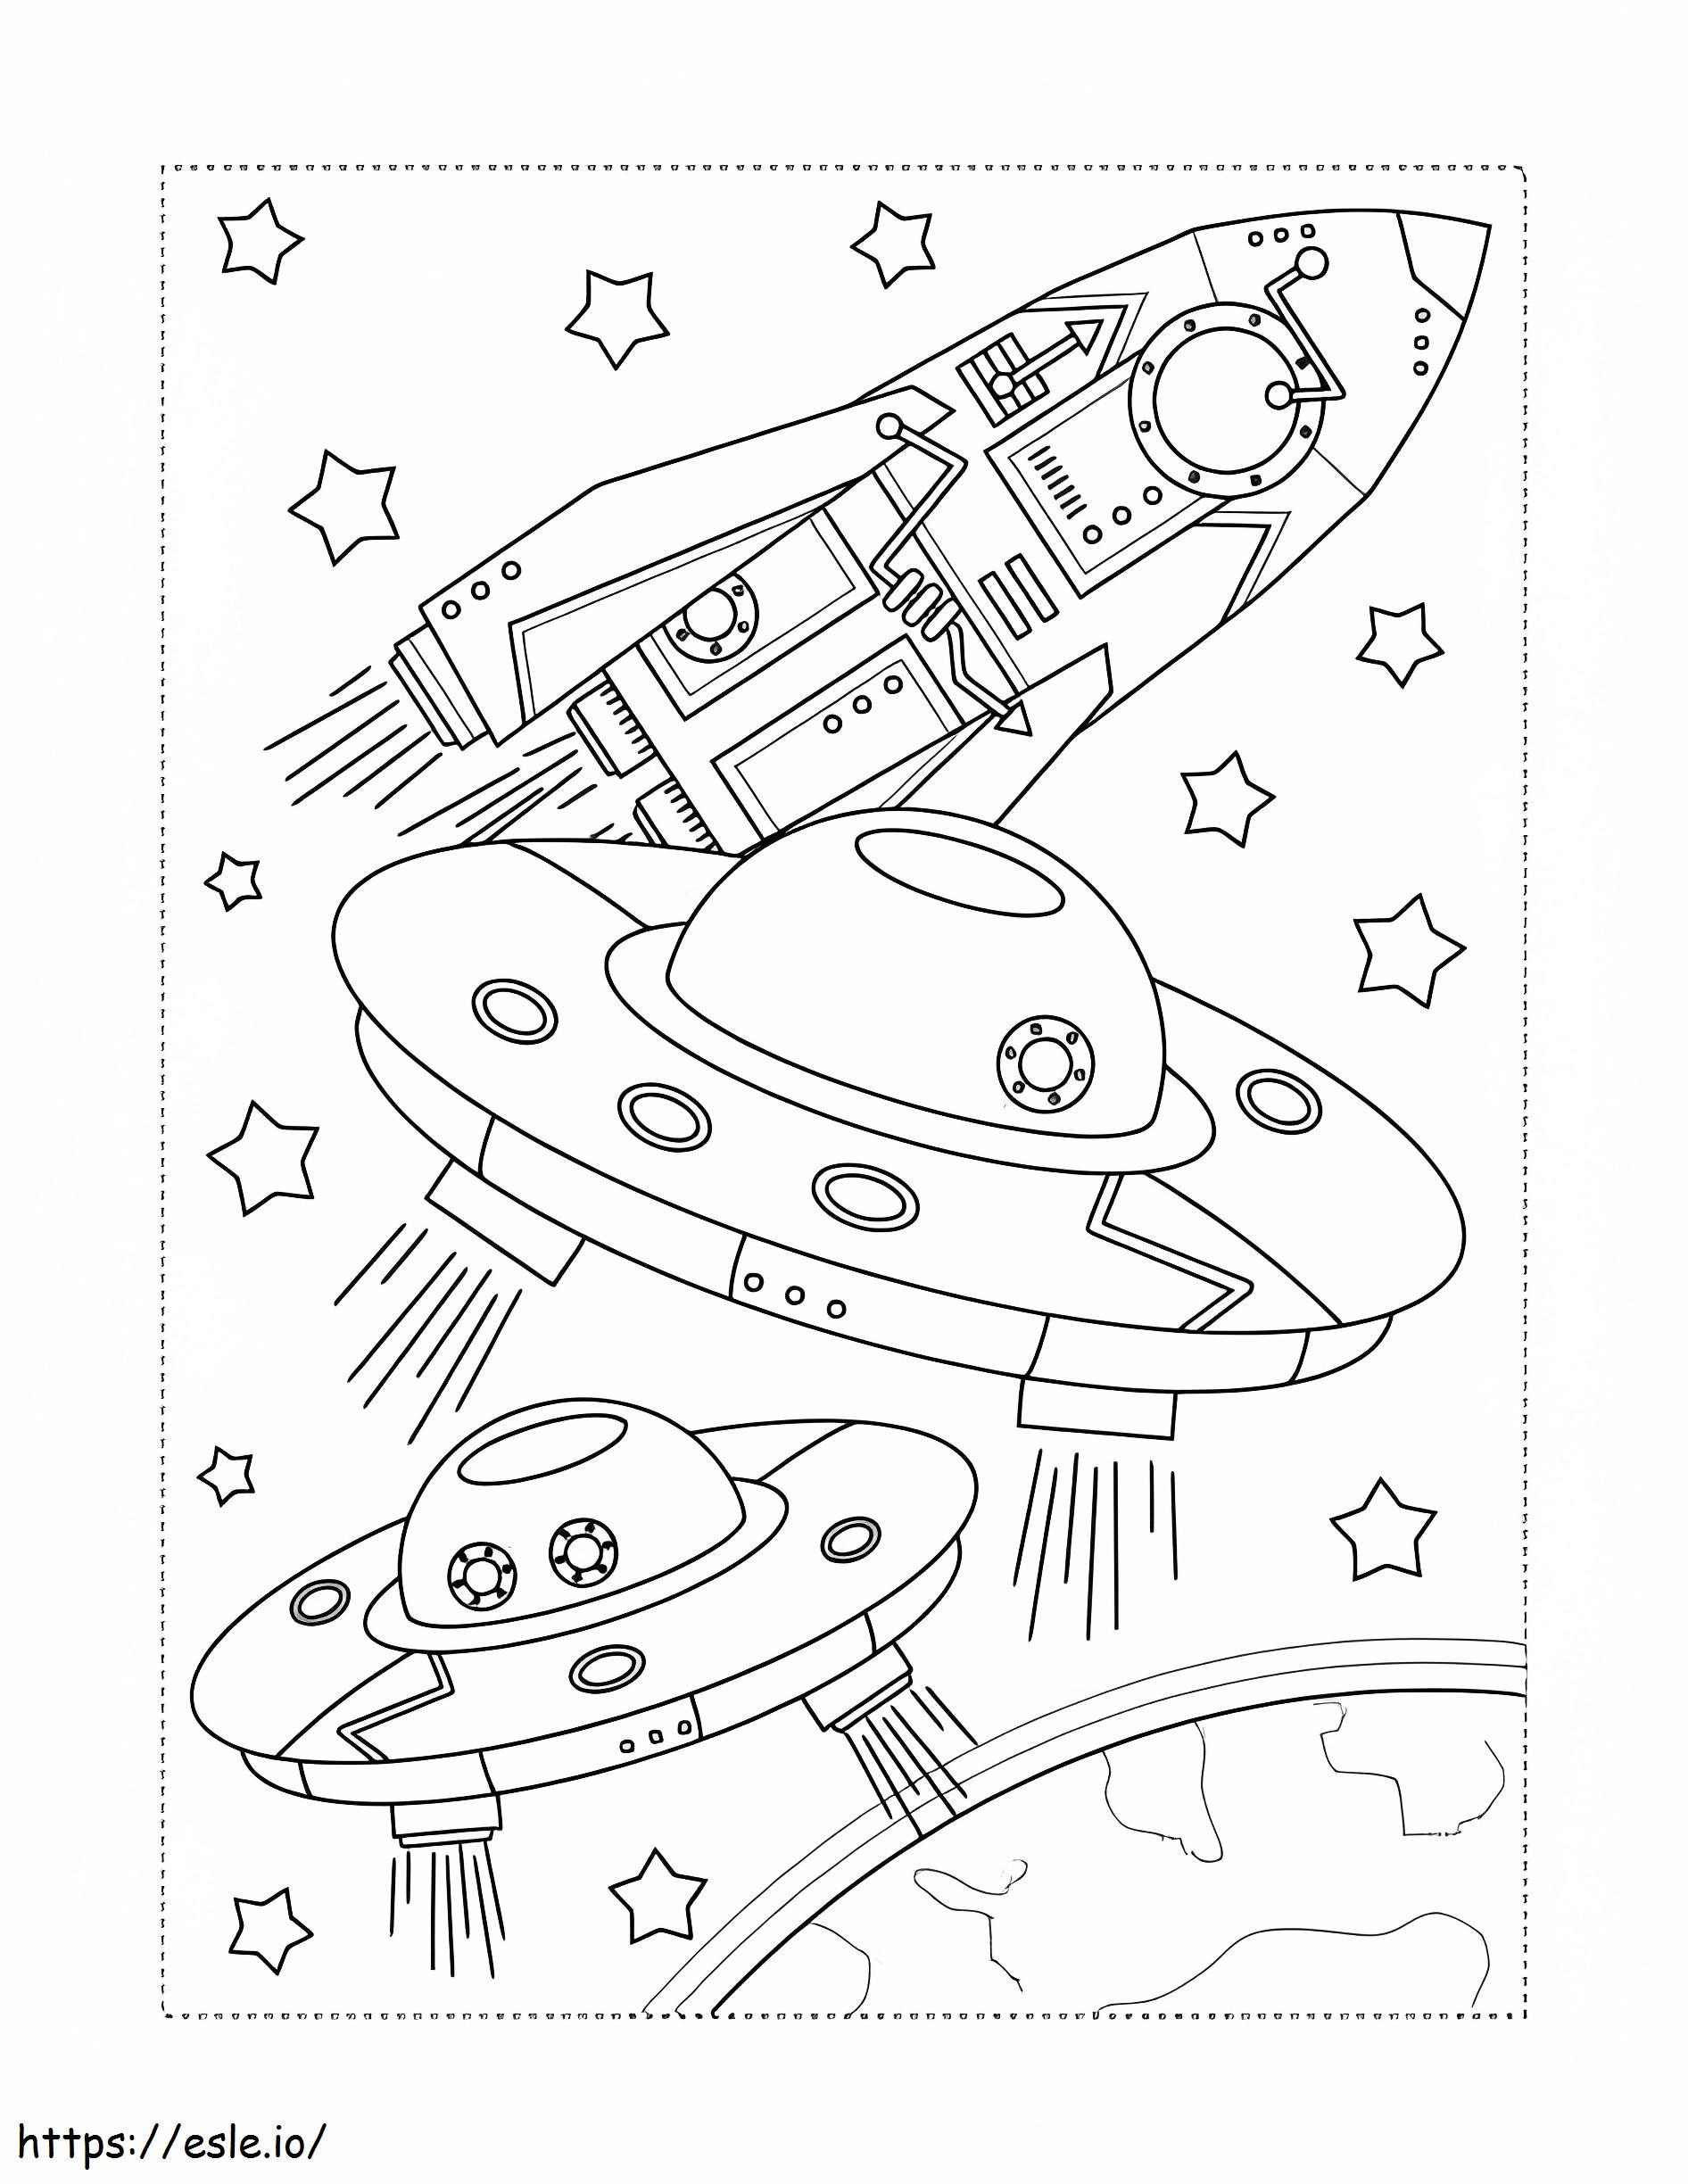 Three Space Ships coloring page